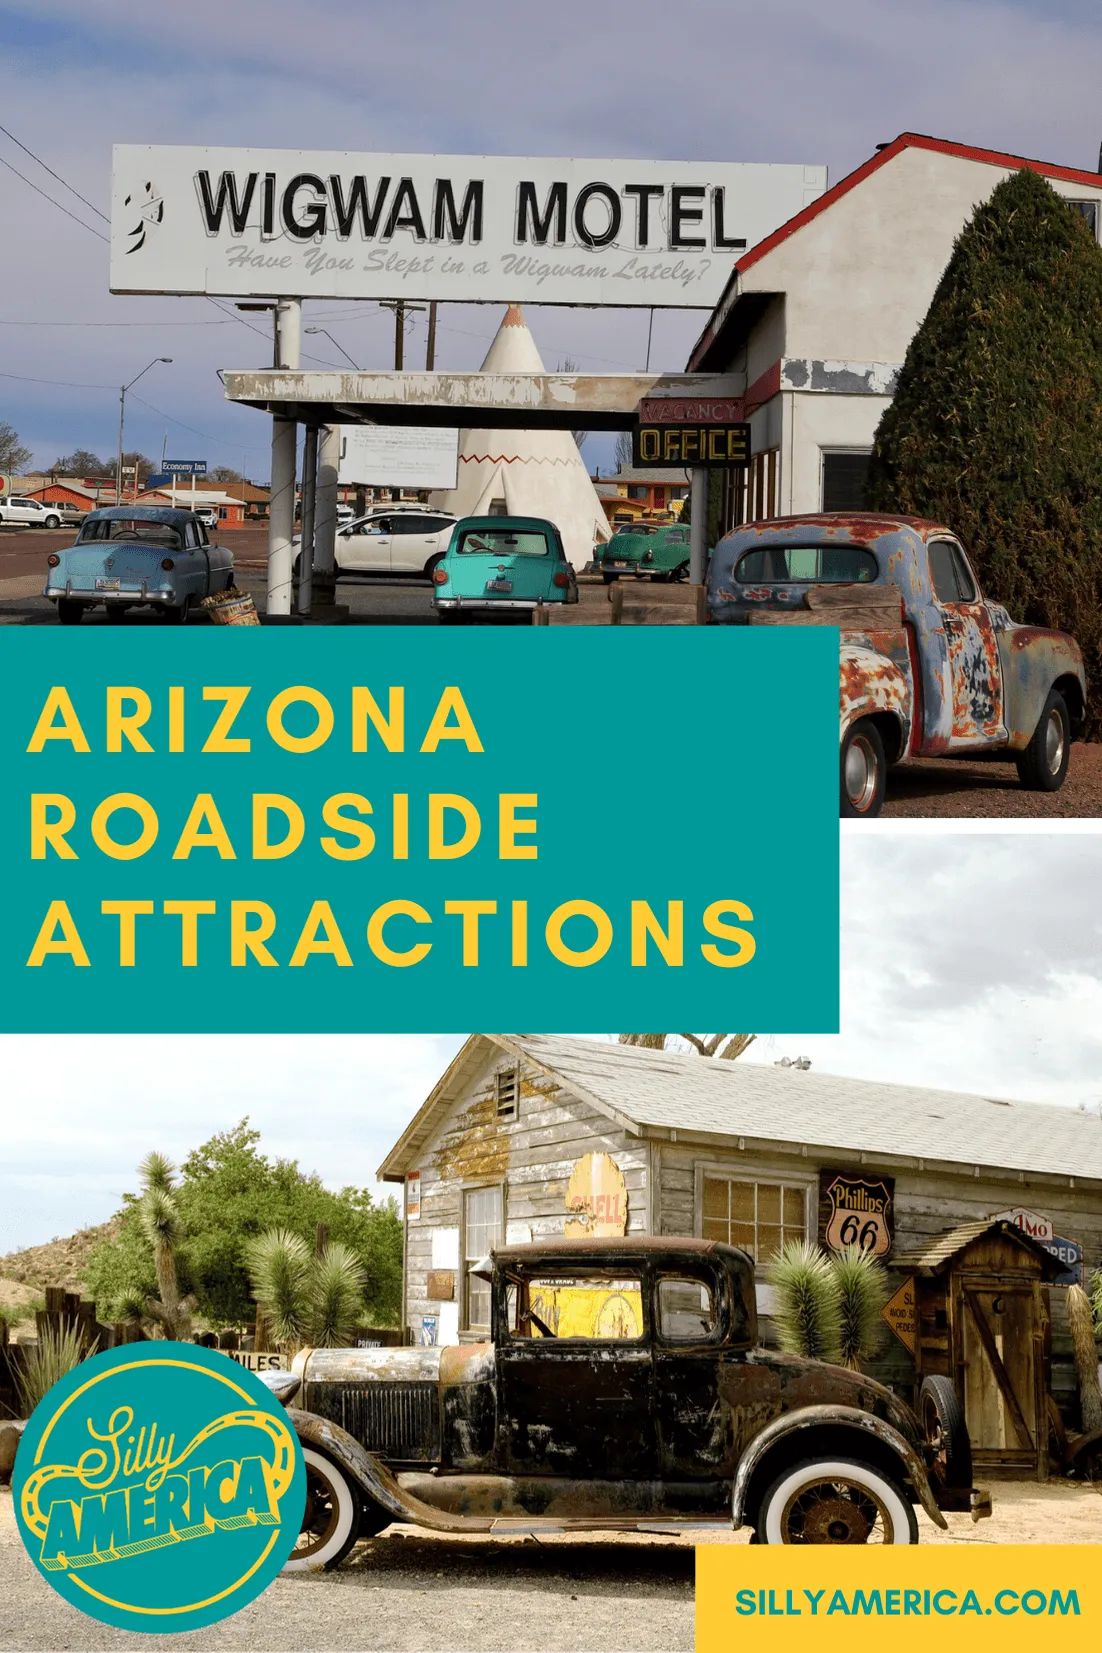 The best Arizona roadside attractions to visit on an Arizona road trip. Add these roadside oddities to your travel bucket list, itinerary, or route map! From Route 66 and beyond, these weird roadside attractions are fun road trip stops for kids or adults! #Arizona #ArizonaRoadsideAttractions #ArizonaMap #ArizonaRoadTripItinerary #ArizonaItinerary #ArizonaBucketLists #ArizonaRoadTripPhotography #PlacesToGoInArizona  #Route66Arizona #ArizonaRoadTripWithKids #WeirdRoadsideAttractions